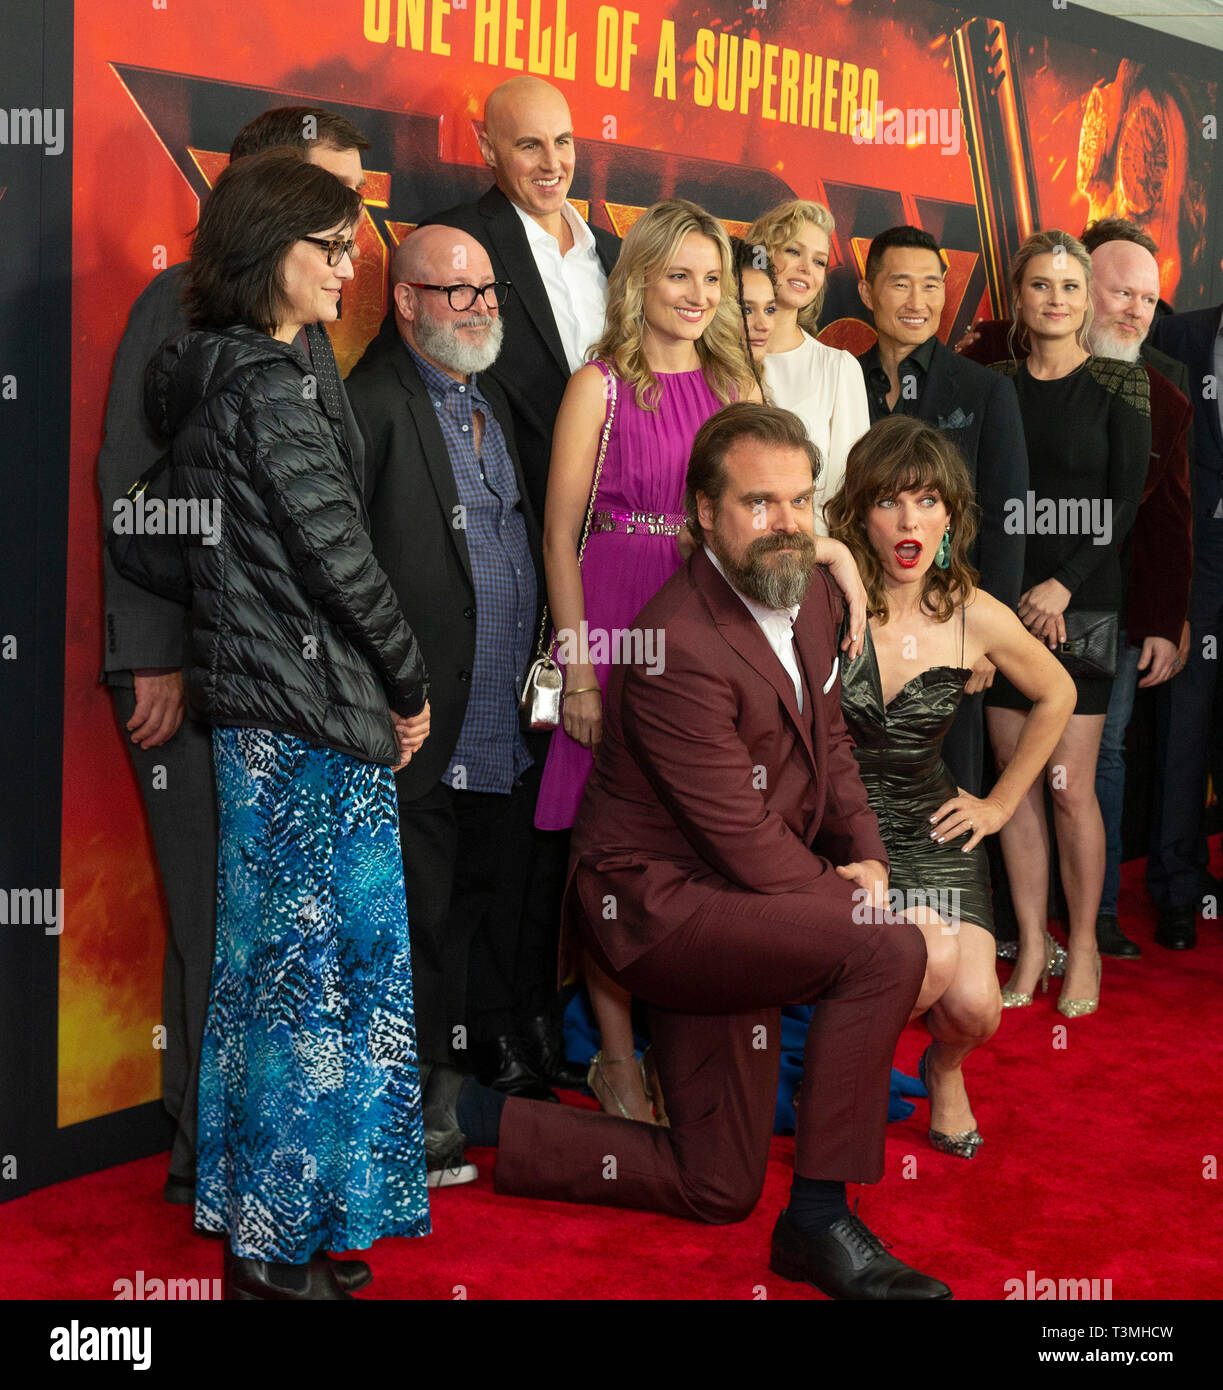 New York, USA. 09th Apr, 2019. Cast and crew attend the Hellboy New York Screening at AMC Lincoln Square Theater Credit: Lev Radin/Pacific Press/Alamy Live News Stock Photo